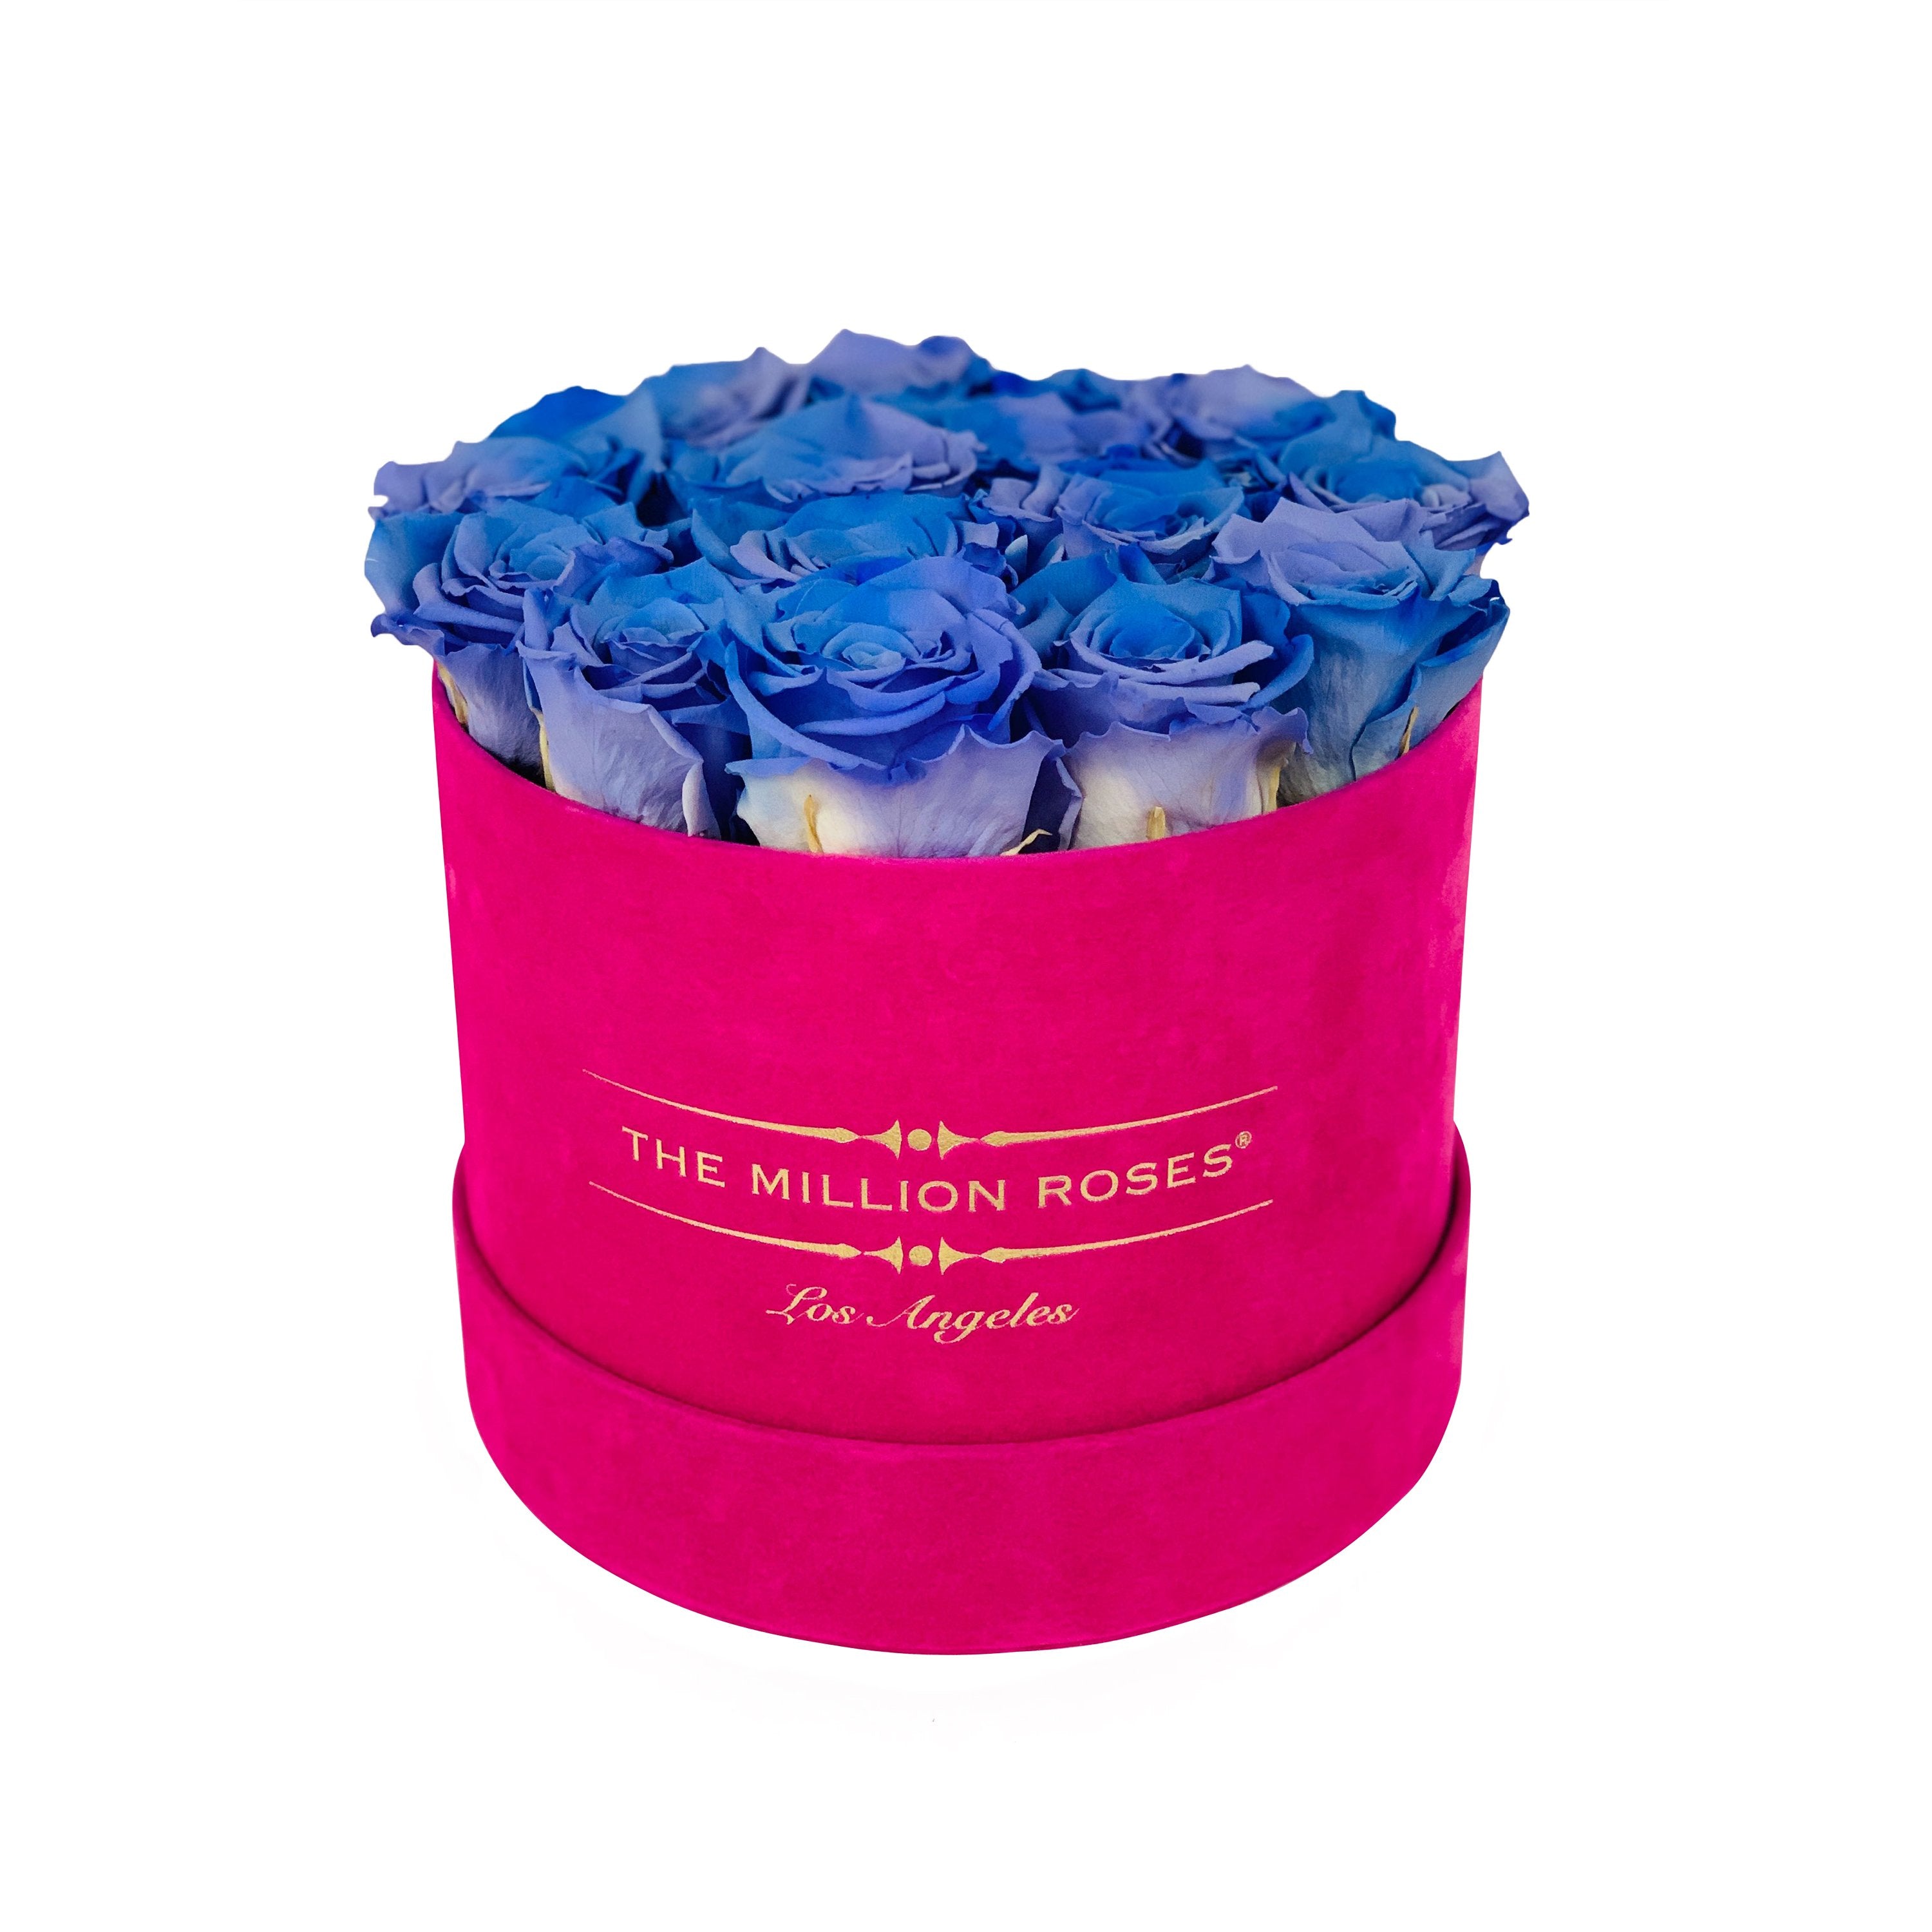 classic round box - hot-pink suede box - Violet Rainbow Roses